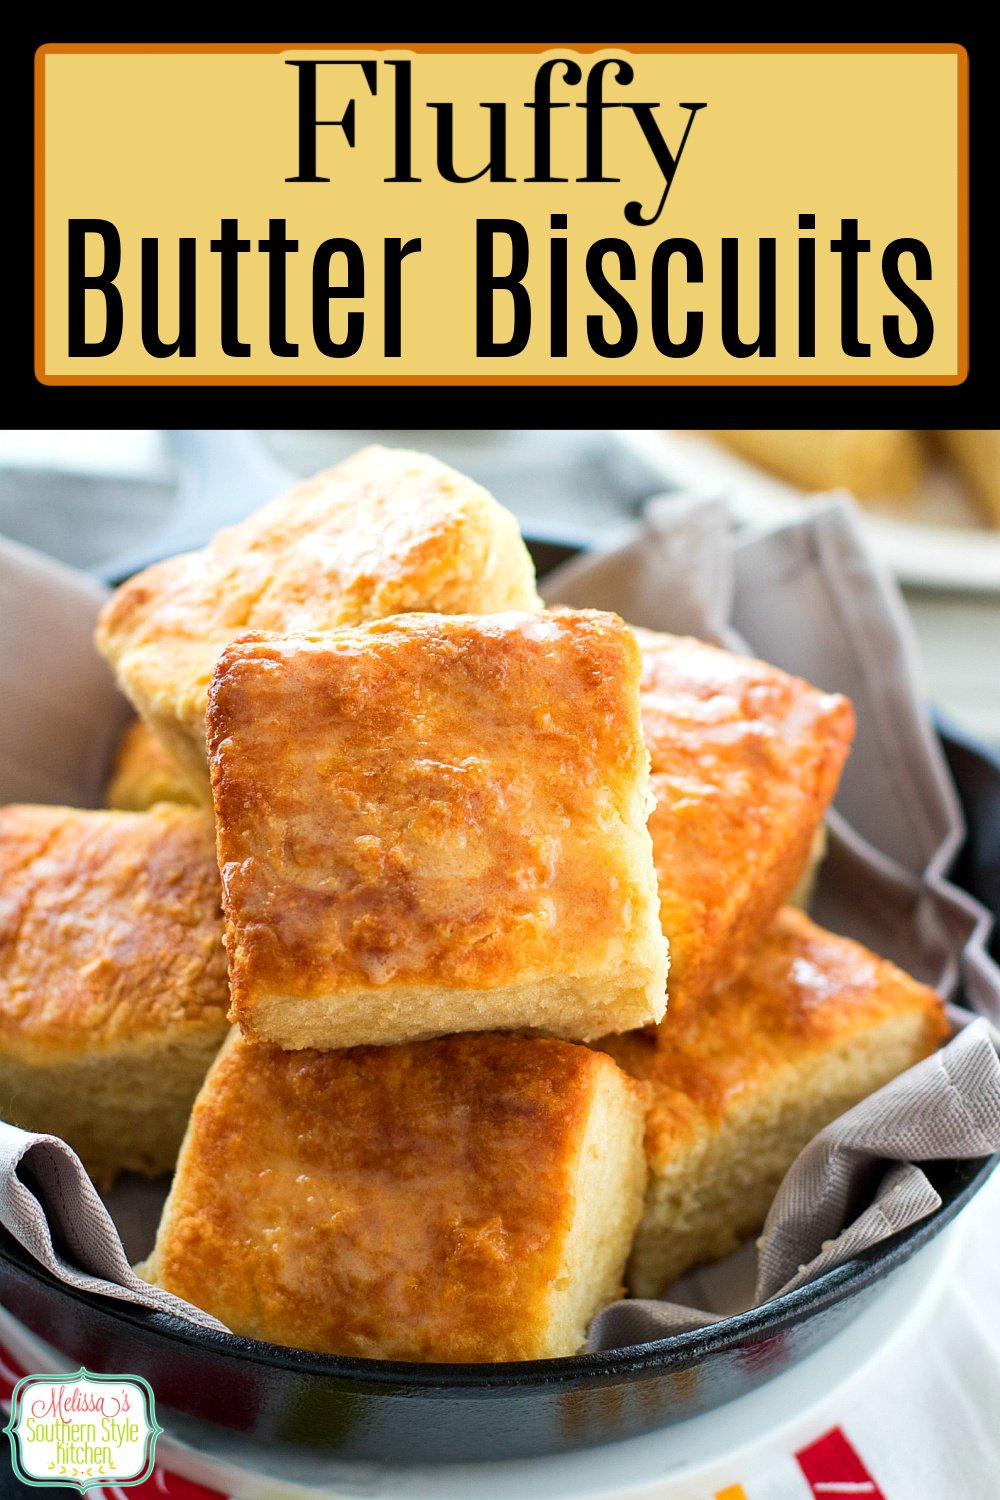 These buttery Fluffy Butter Biscuits are cut into squares using a knife, no biscuit cutter required! #biscuits #butterbiscuits #southernbiscuits #easyrecipes #buttermilkbiscuits #biscuitrecipes #southernfood #southernrecipes #breakfast #bread #brunch #holidayrecipes #holidaybrunchrecipes via @melissasssk